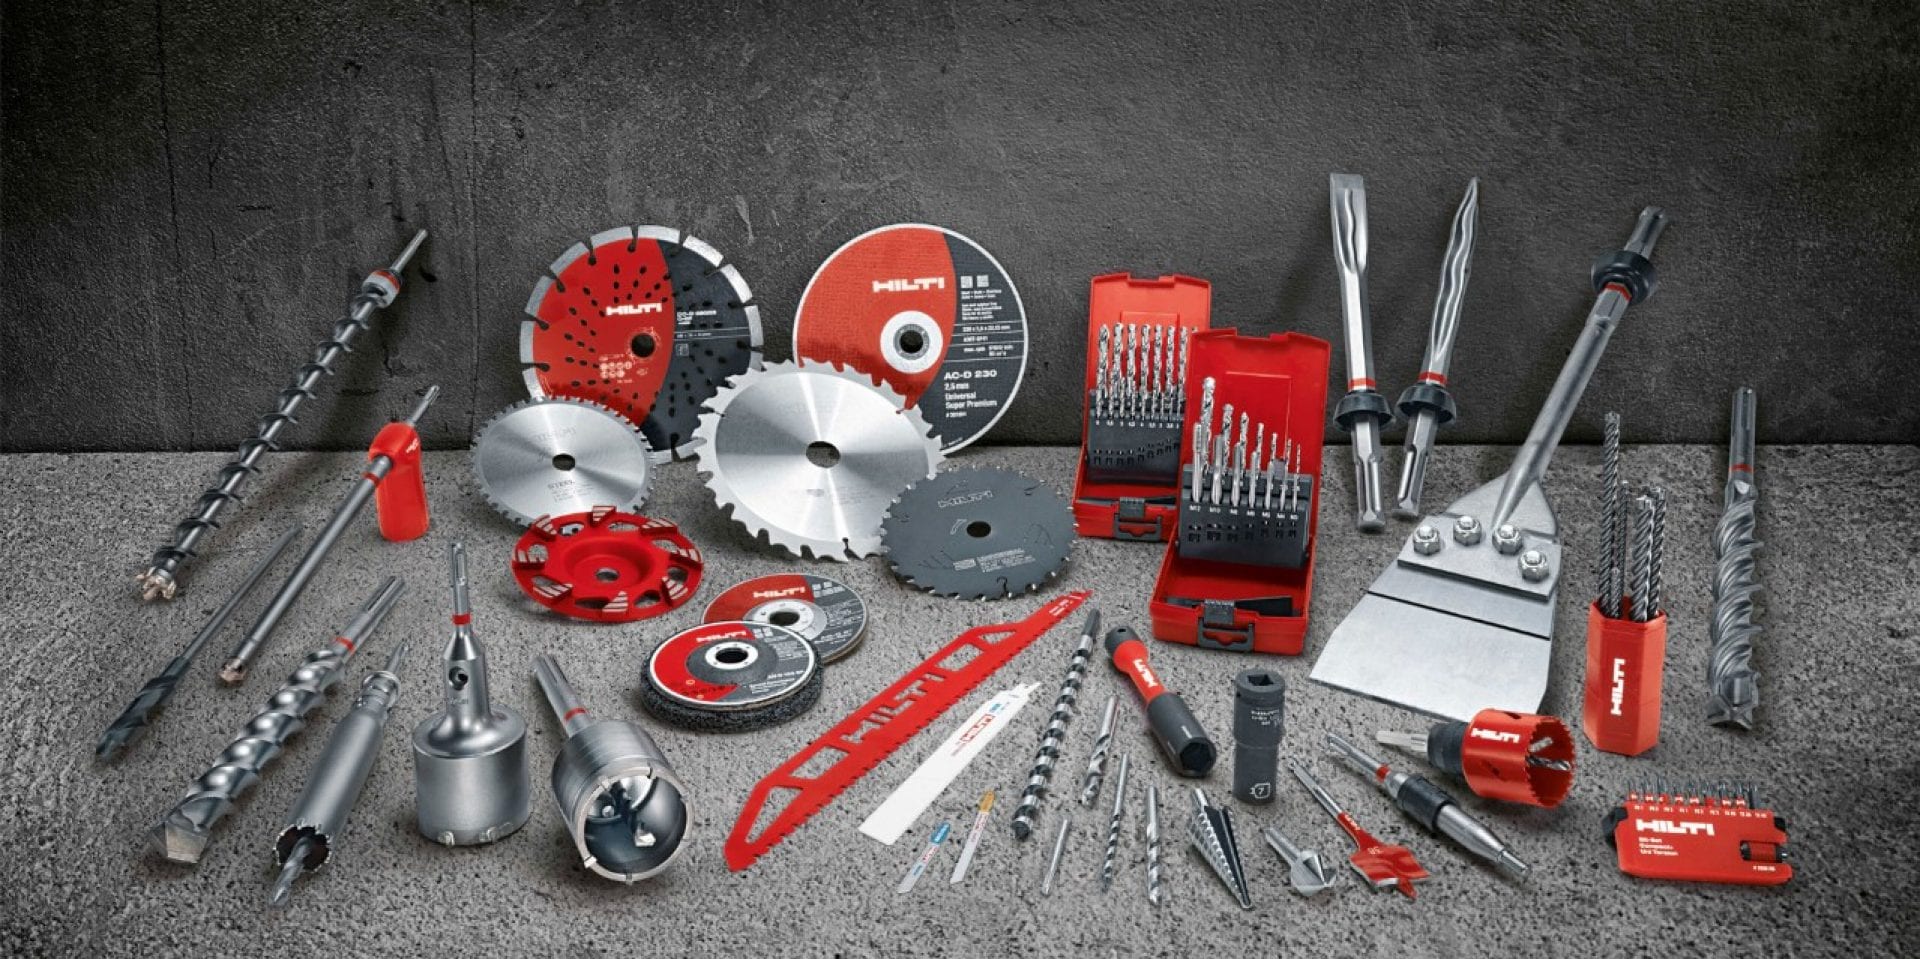 hilti inserts and consumable image